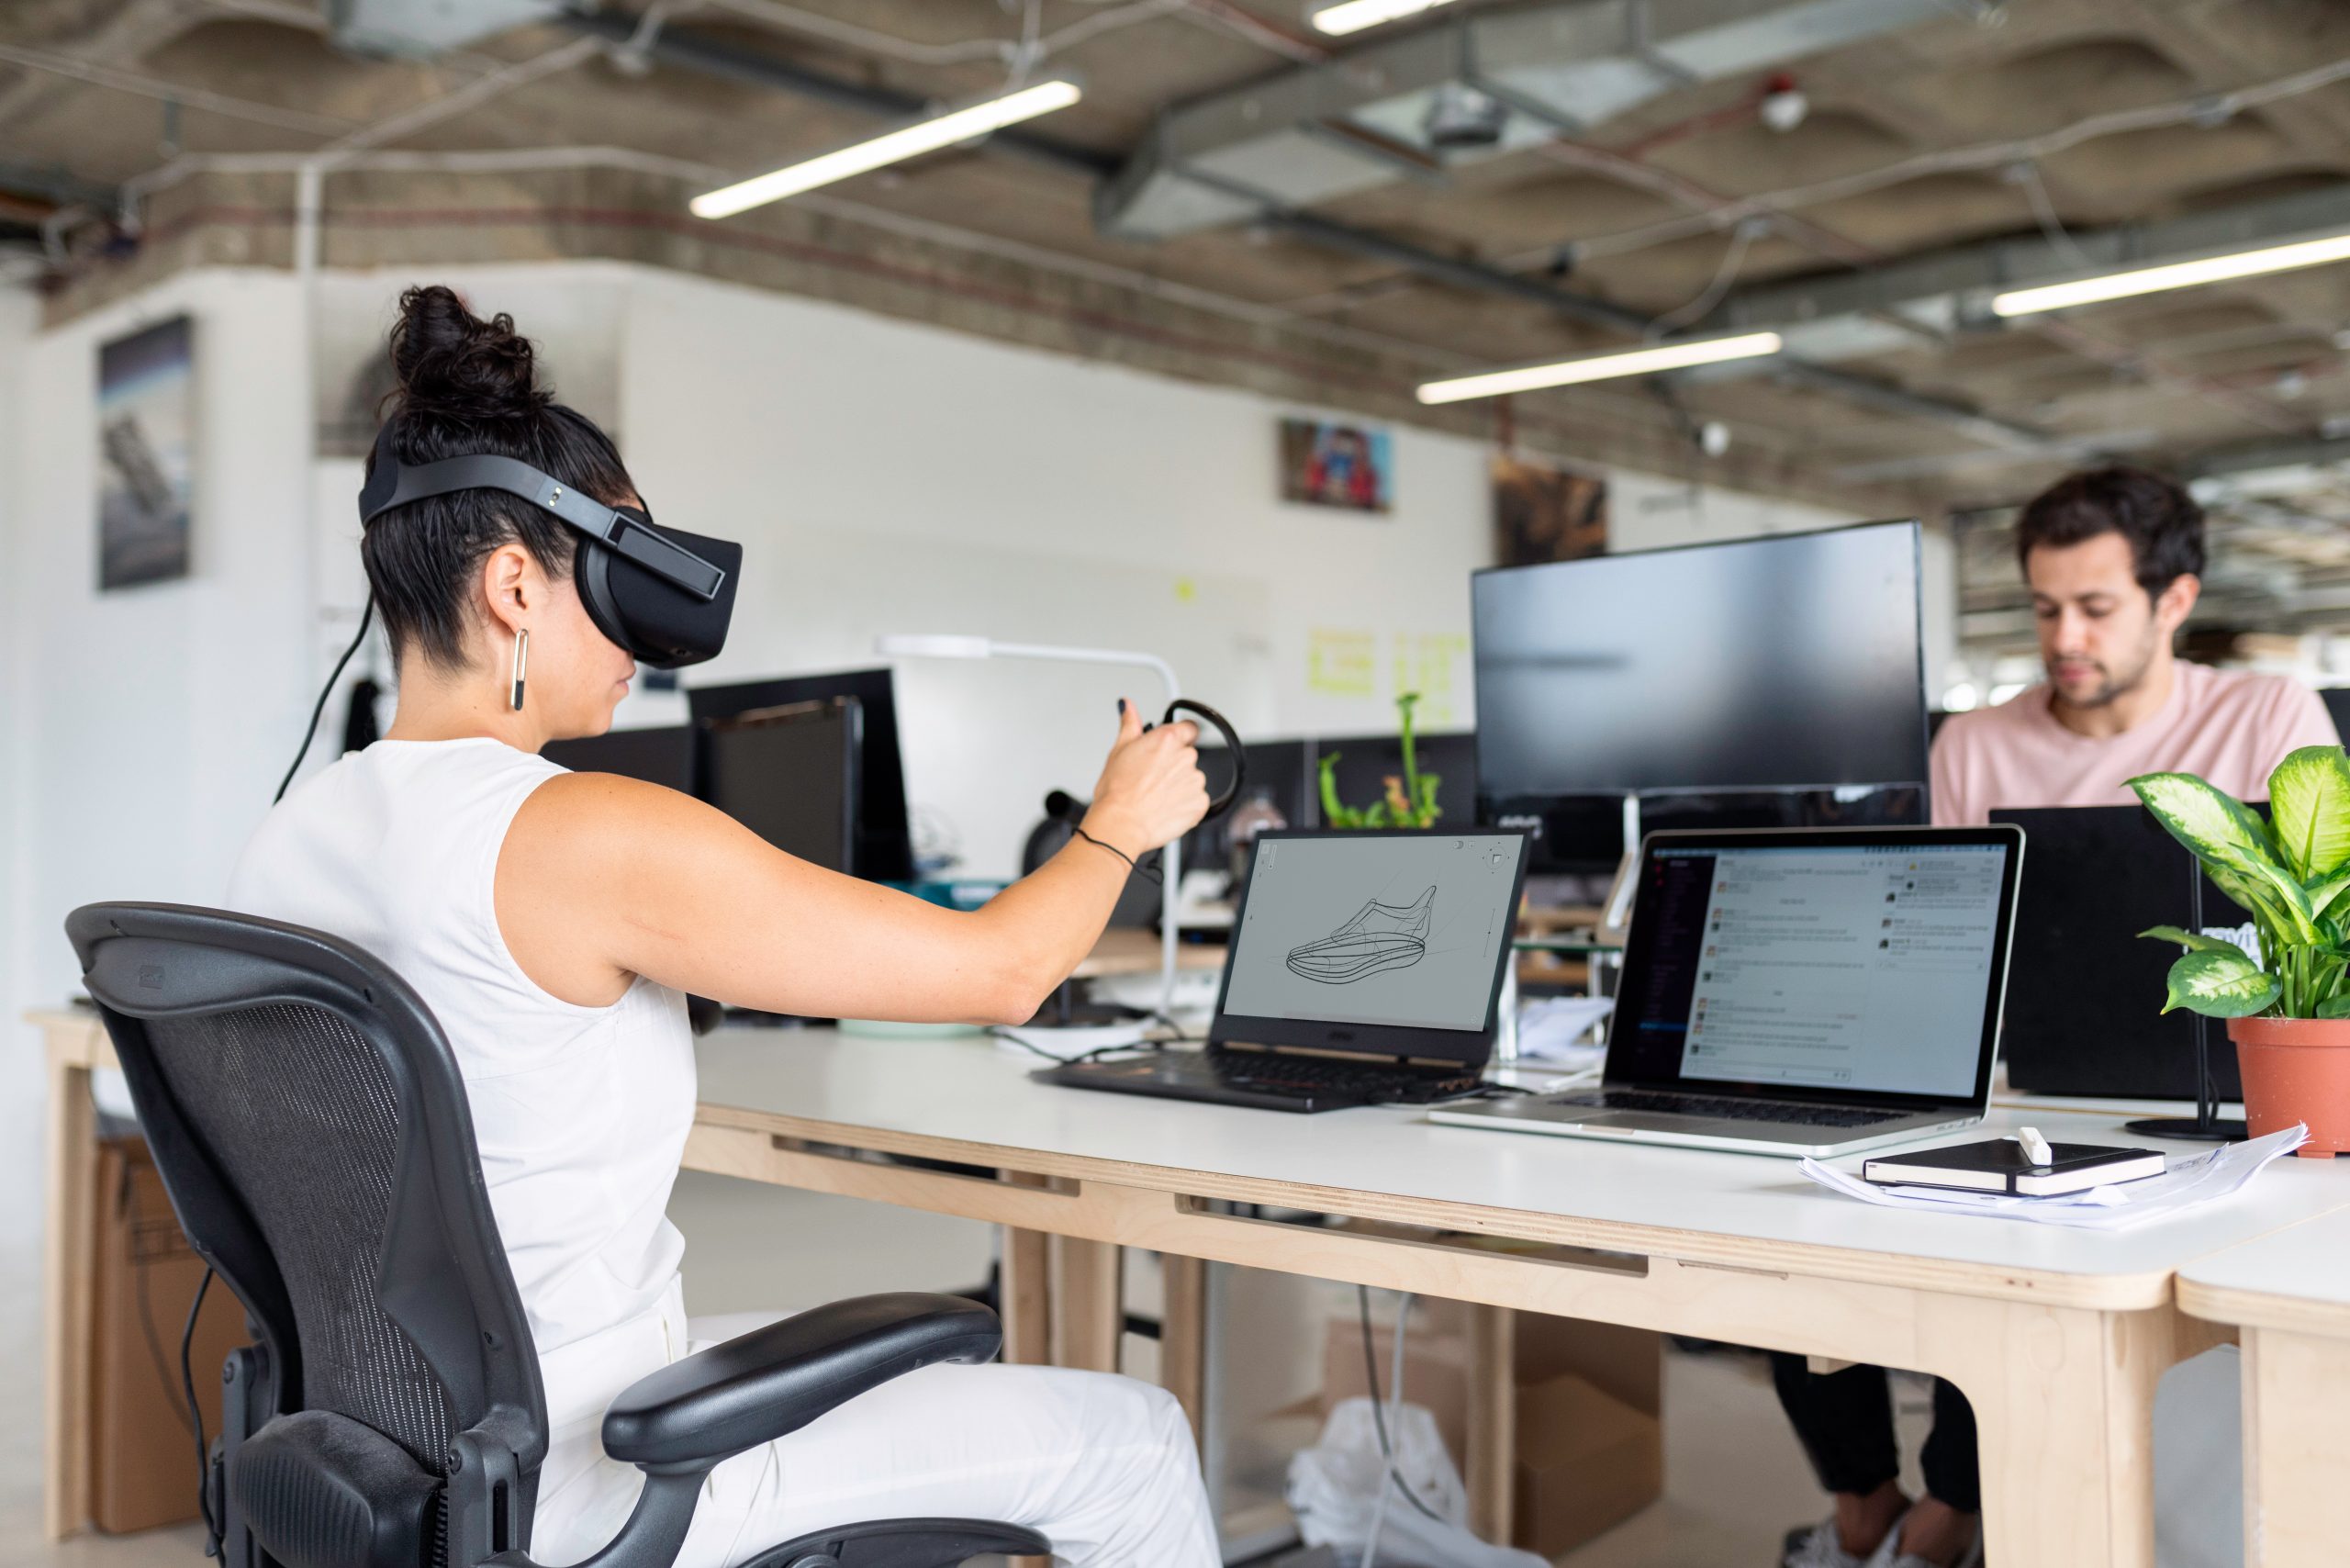 Woman Using Laptop Computer With VR Headset (Virtual Reality